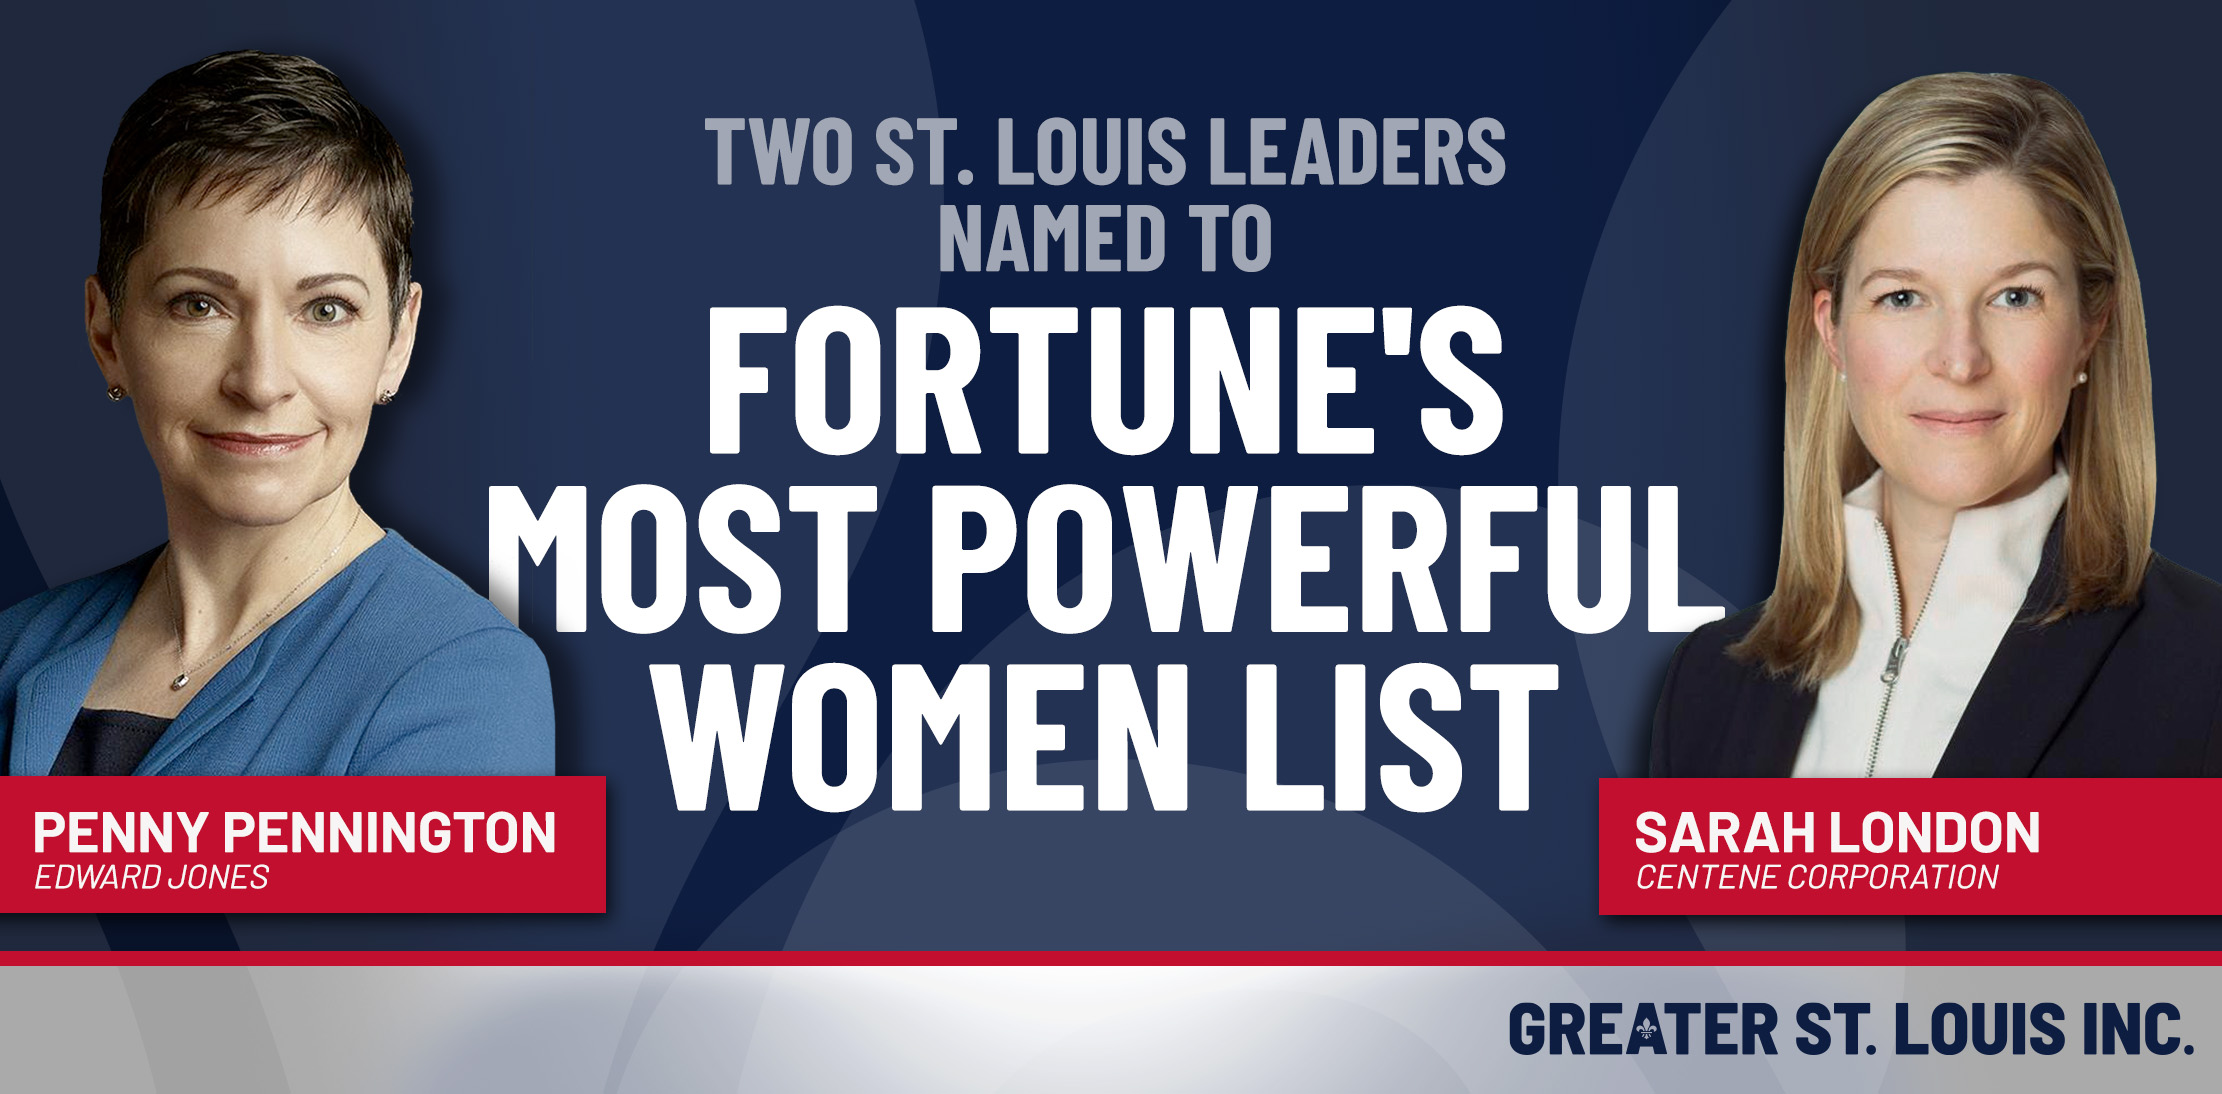 Centene’s Sarah London and Edward Jones’ Penny Pennington named to Fortune's Most Powerful Women list..